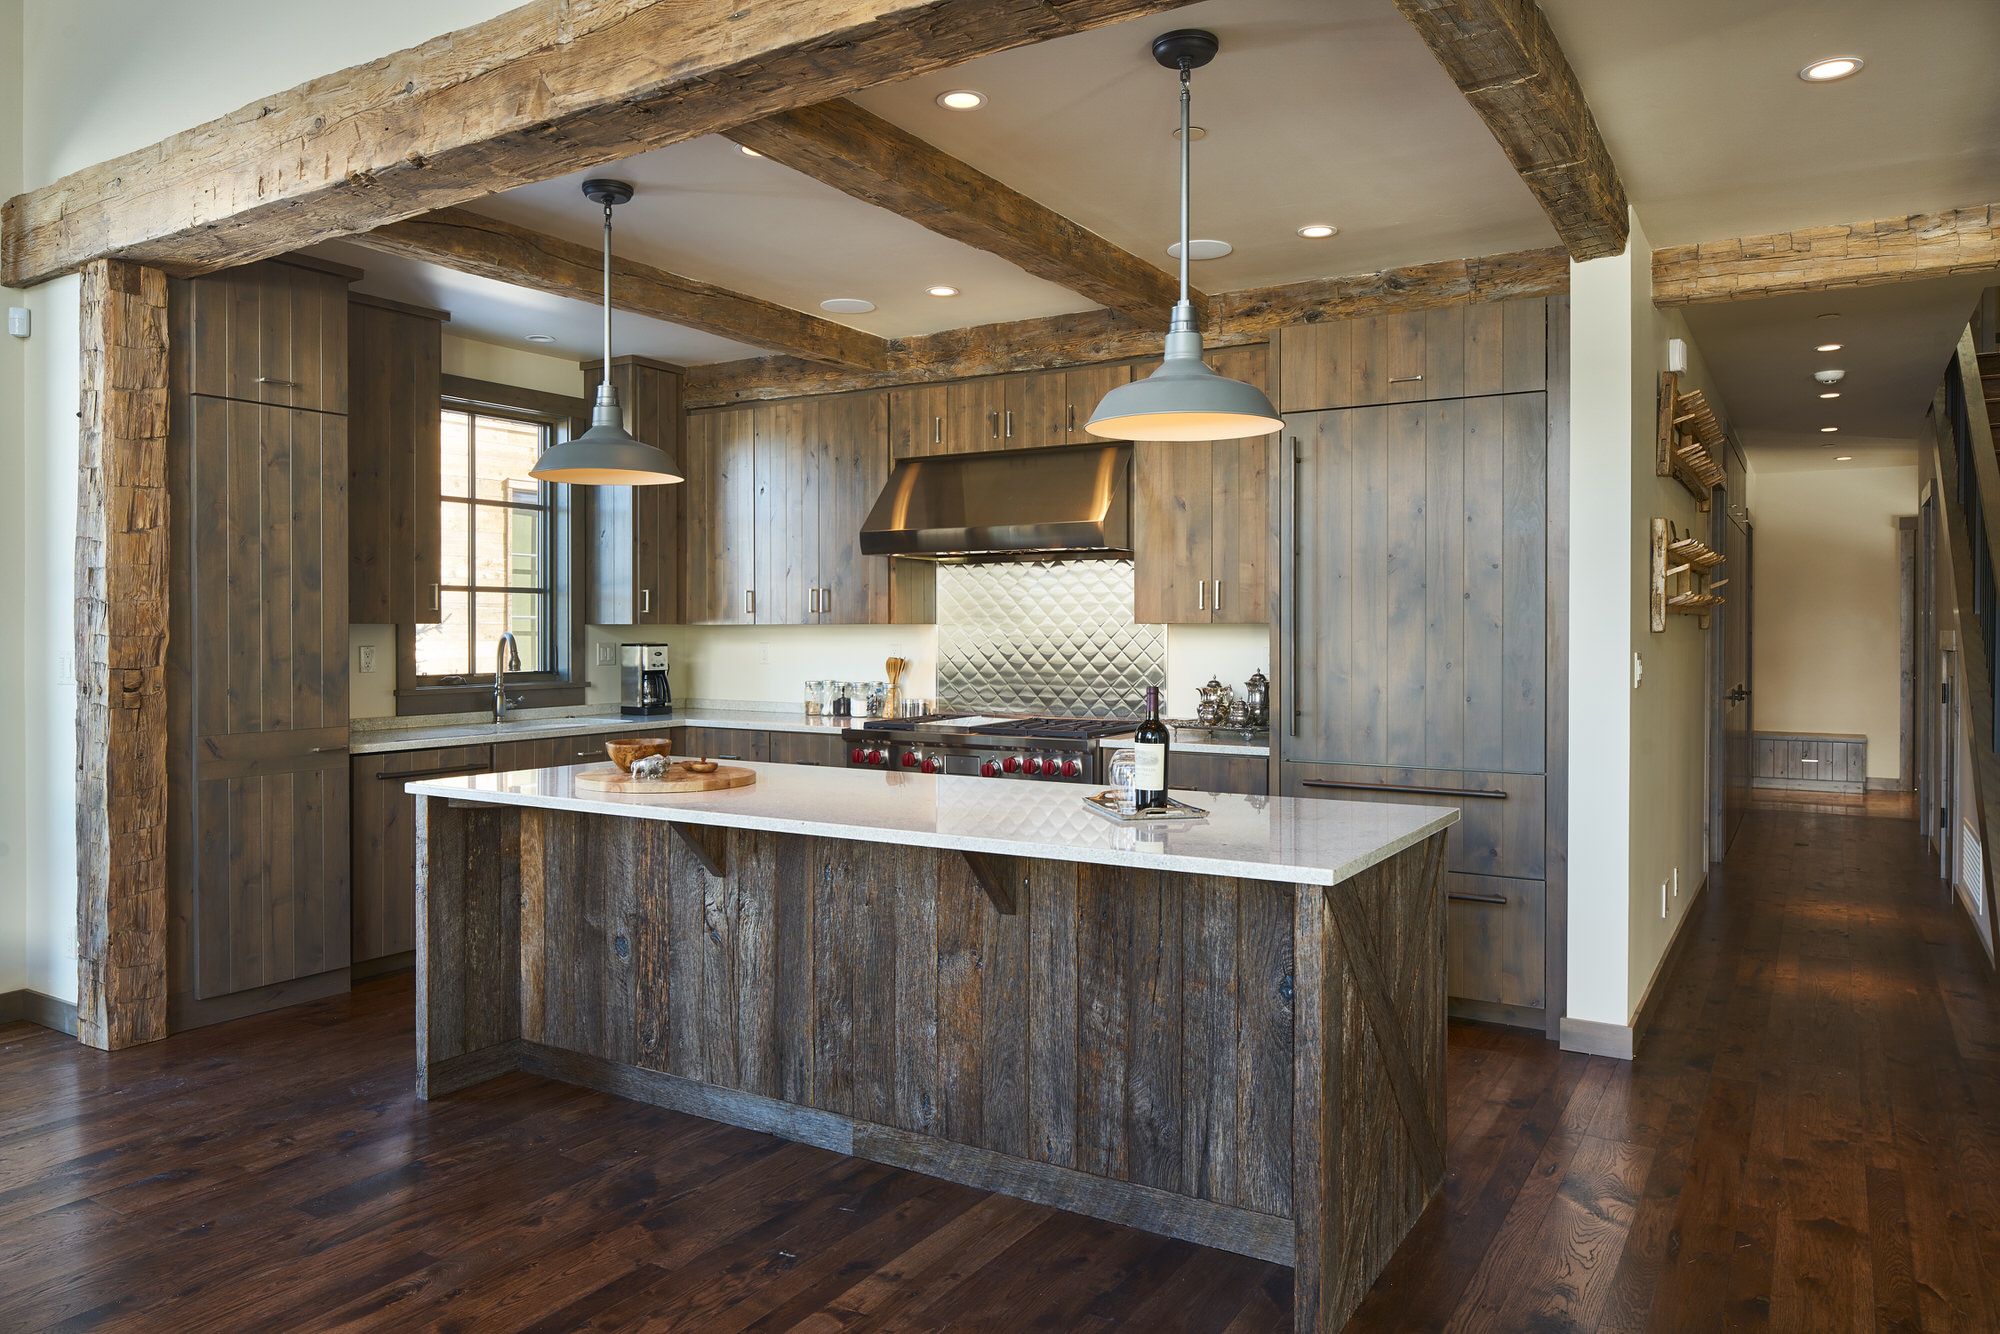 Rustic-Style Kitchen